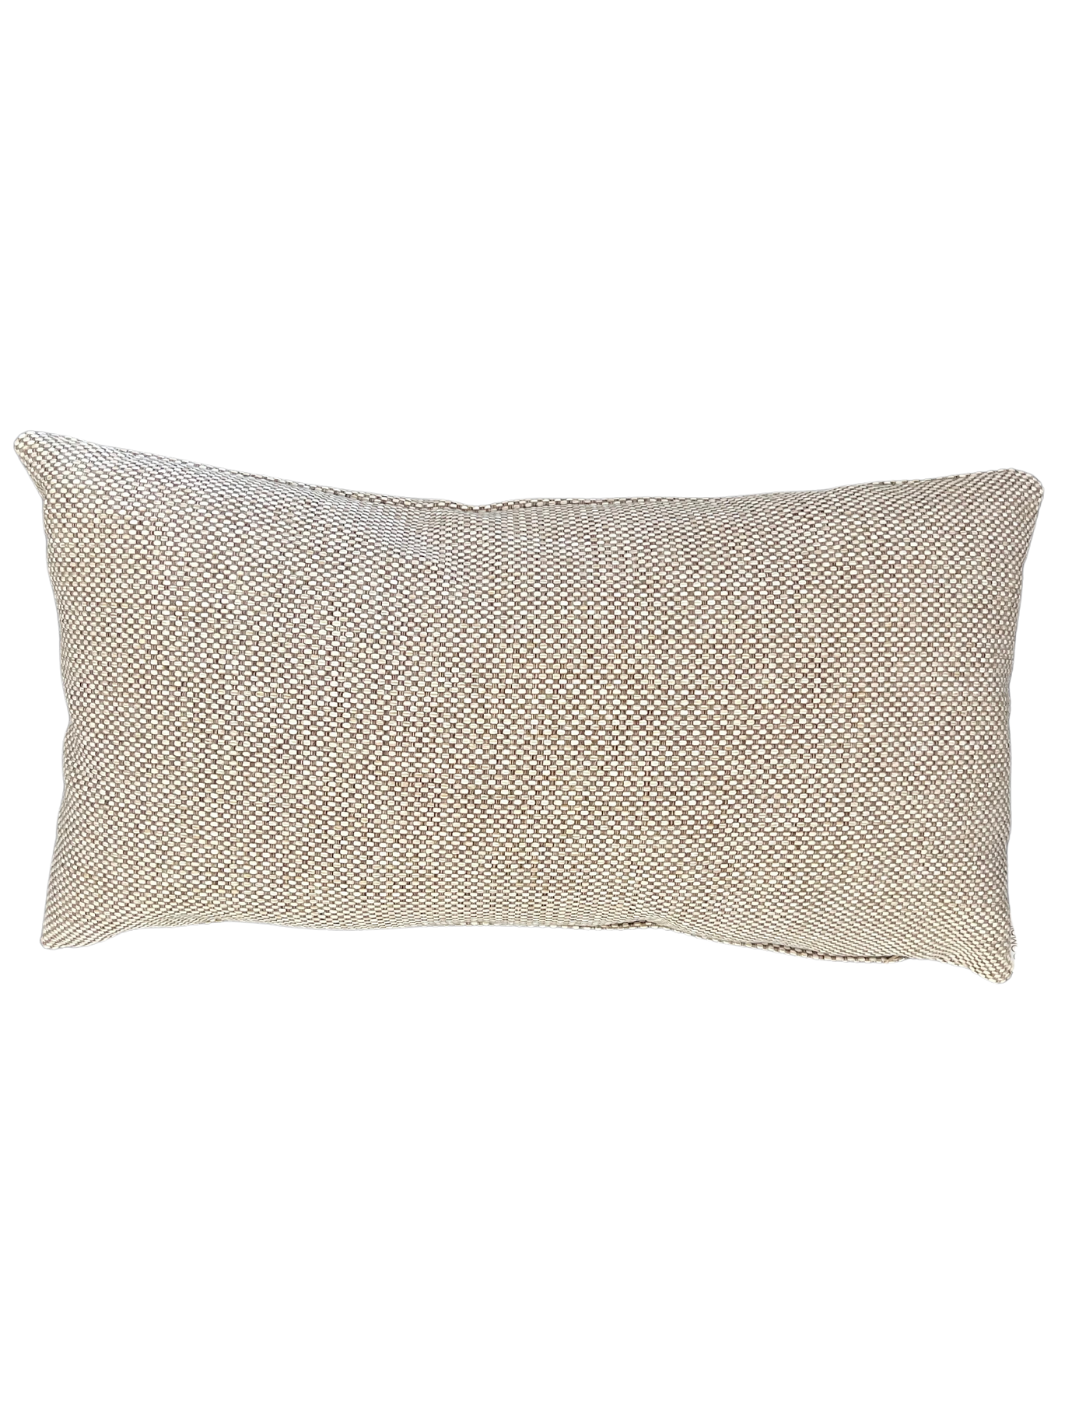 Brown and White Woven Lumbar Pillow